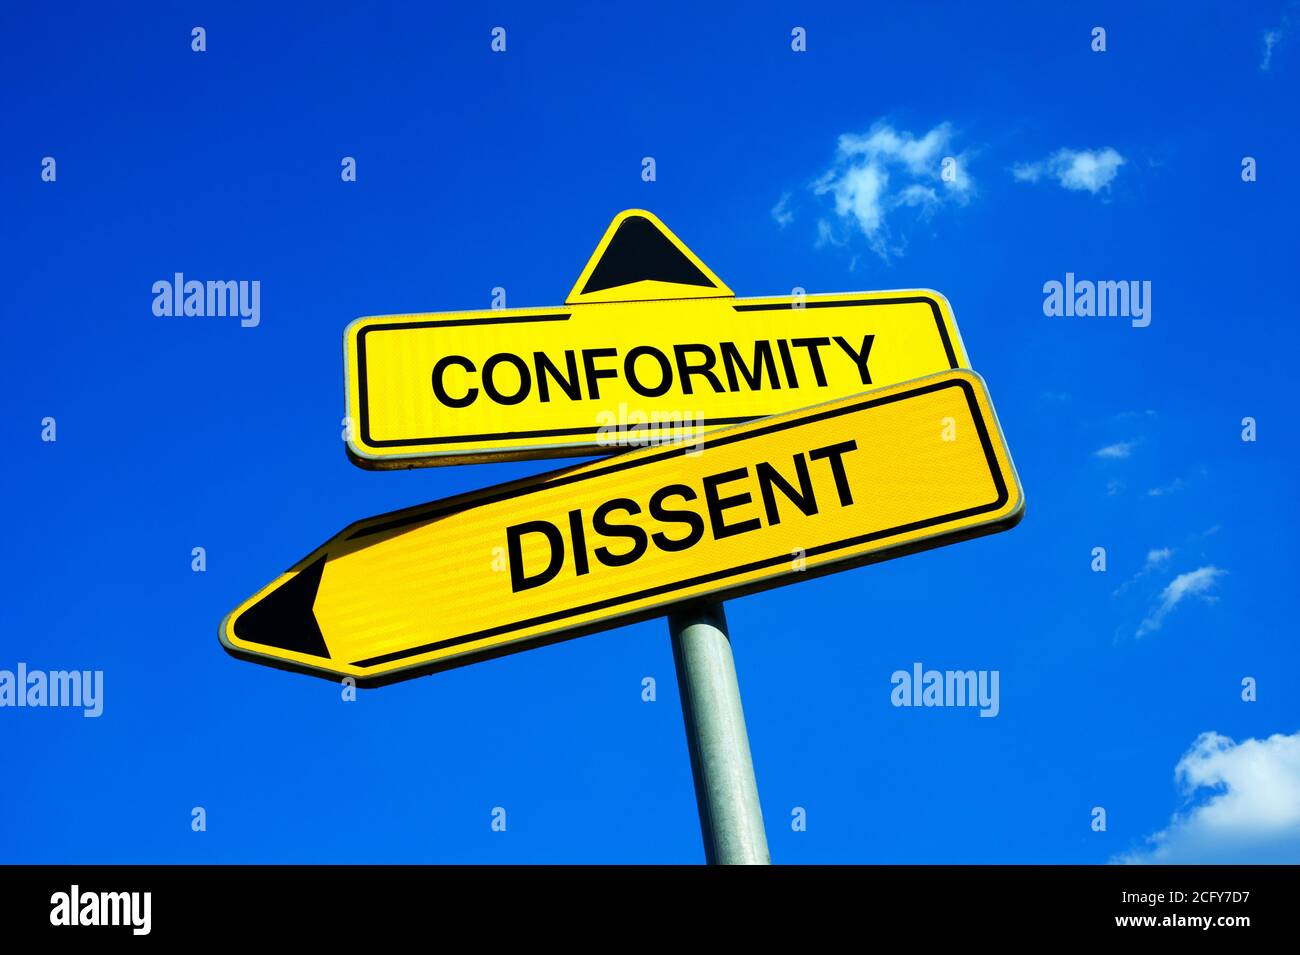 Conformity or Dissent - Traffic sign with two options - appeal to subversive fight against oppression and repressive regime. Freedom and liberty. Stock Photo